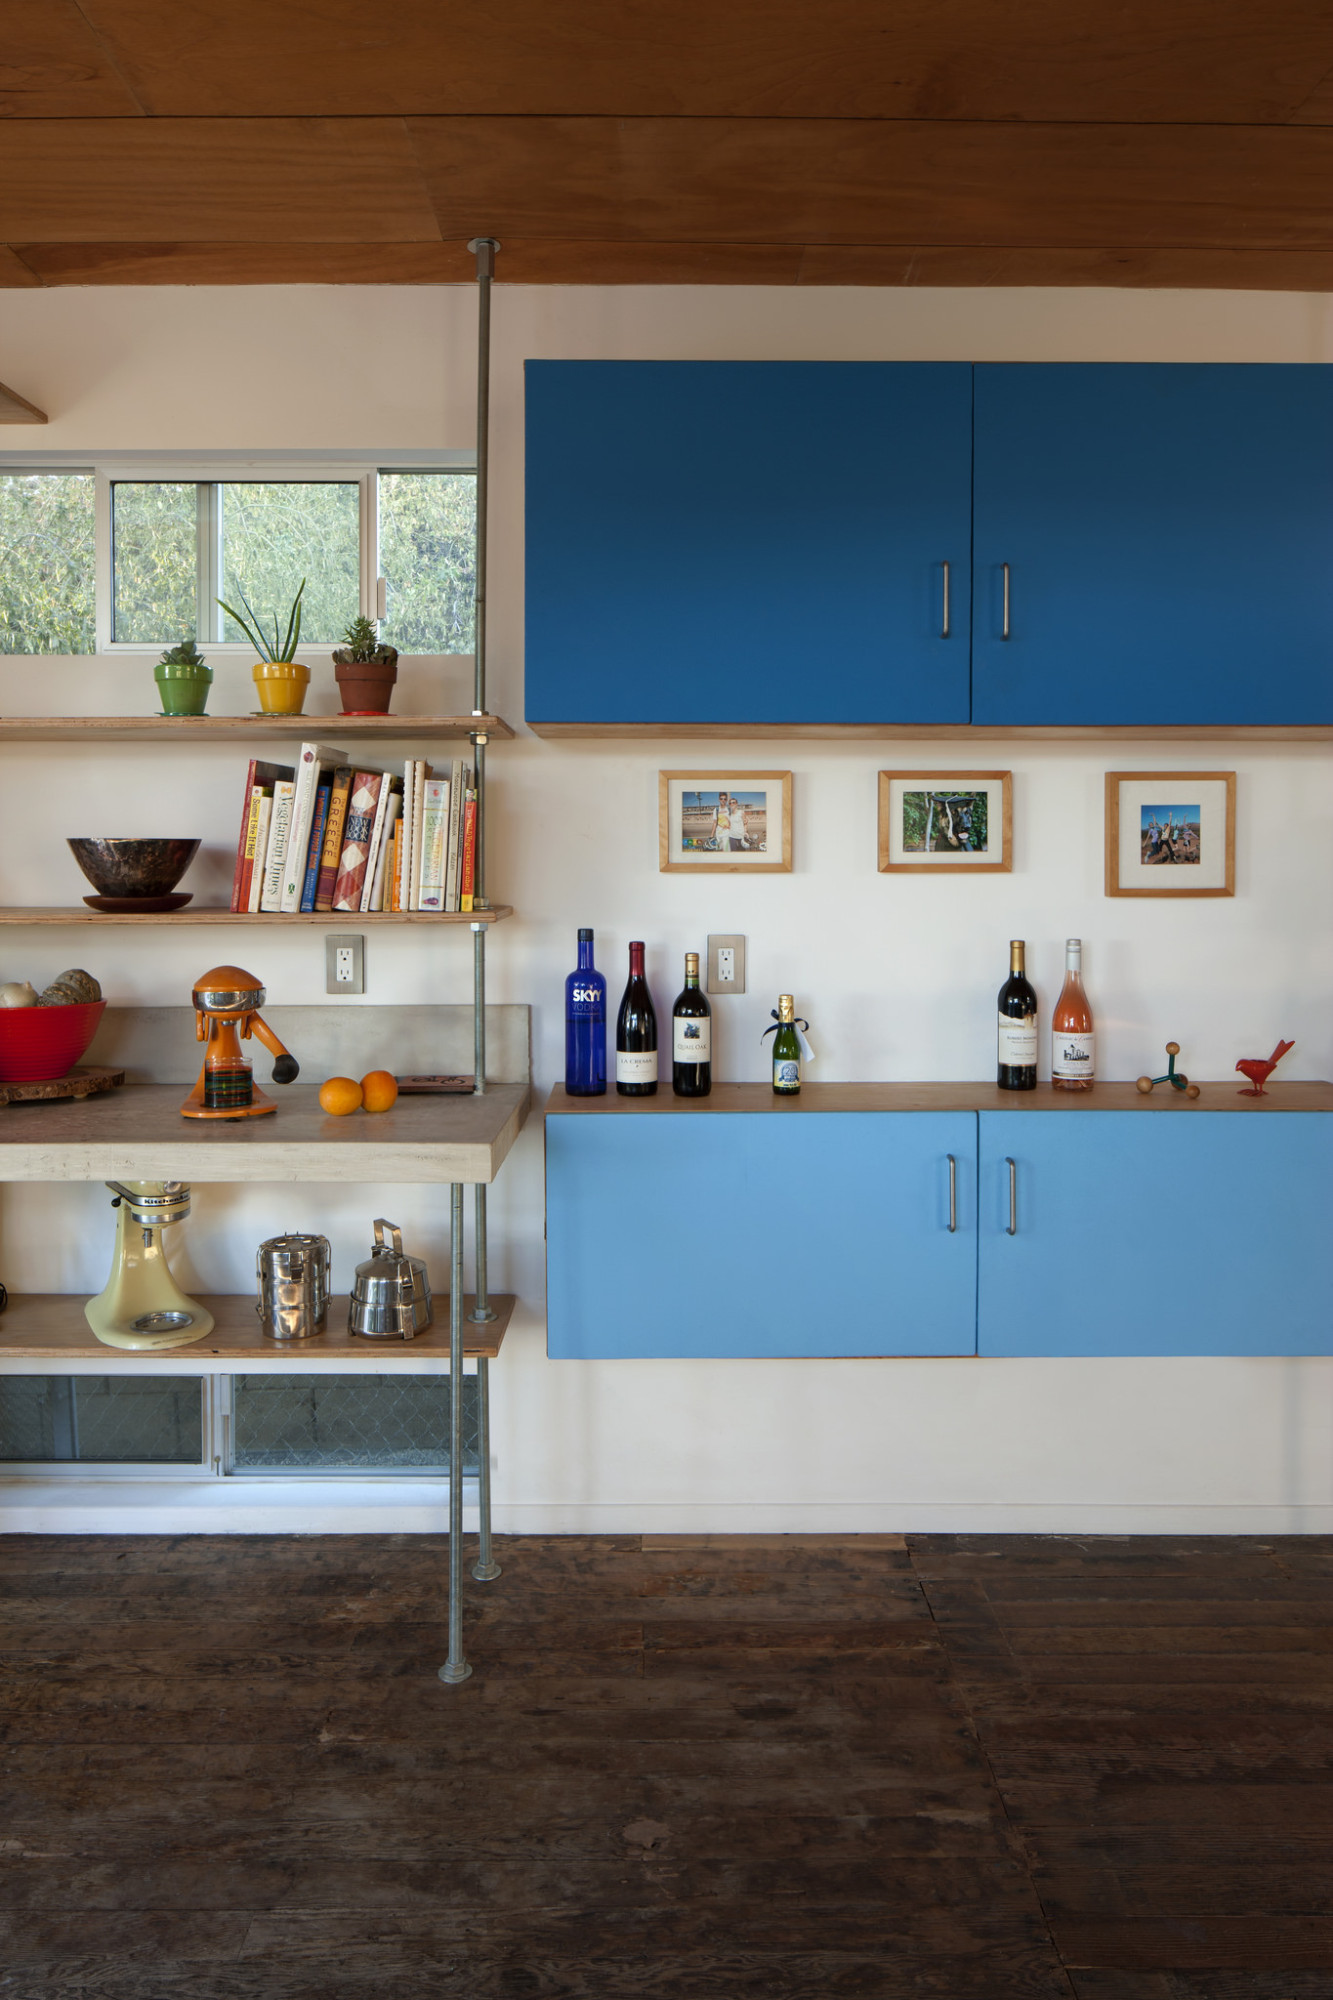 A Handy Guide To Having A Colorful Home That Still Looks Classy